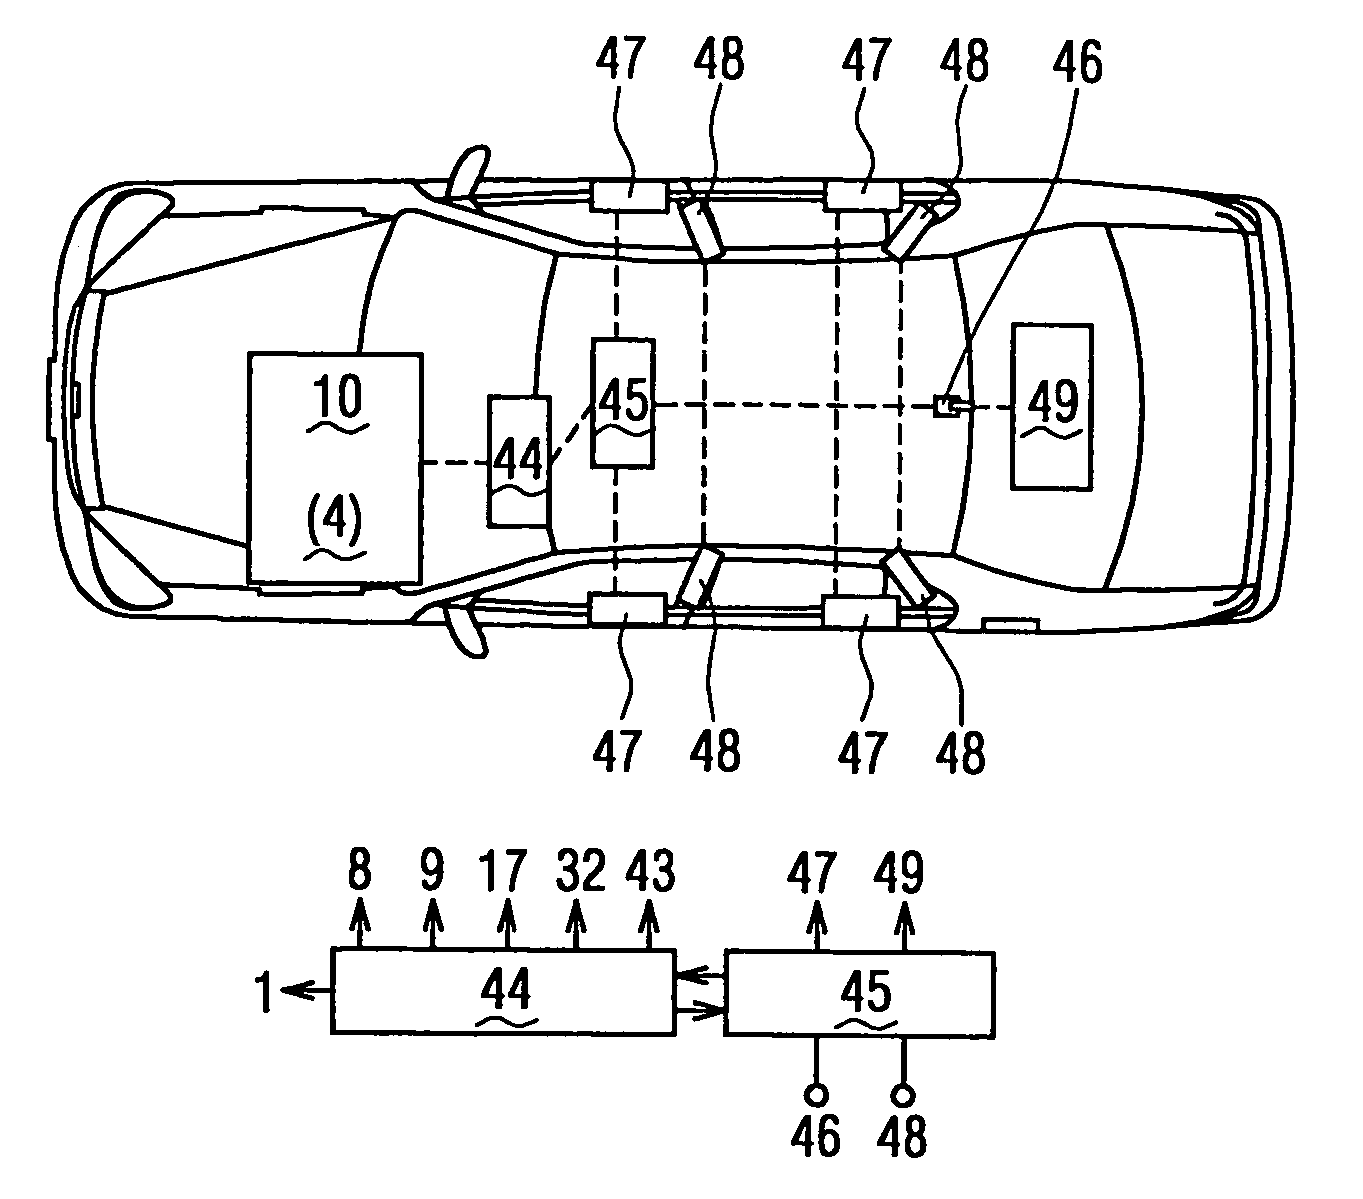 Vehicle ventilation and deodorization system